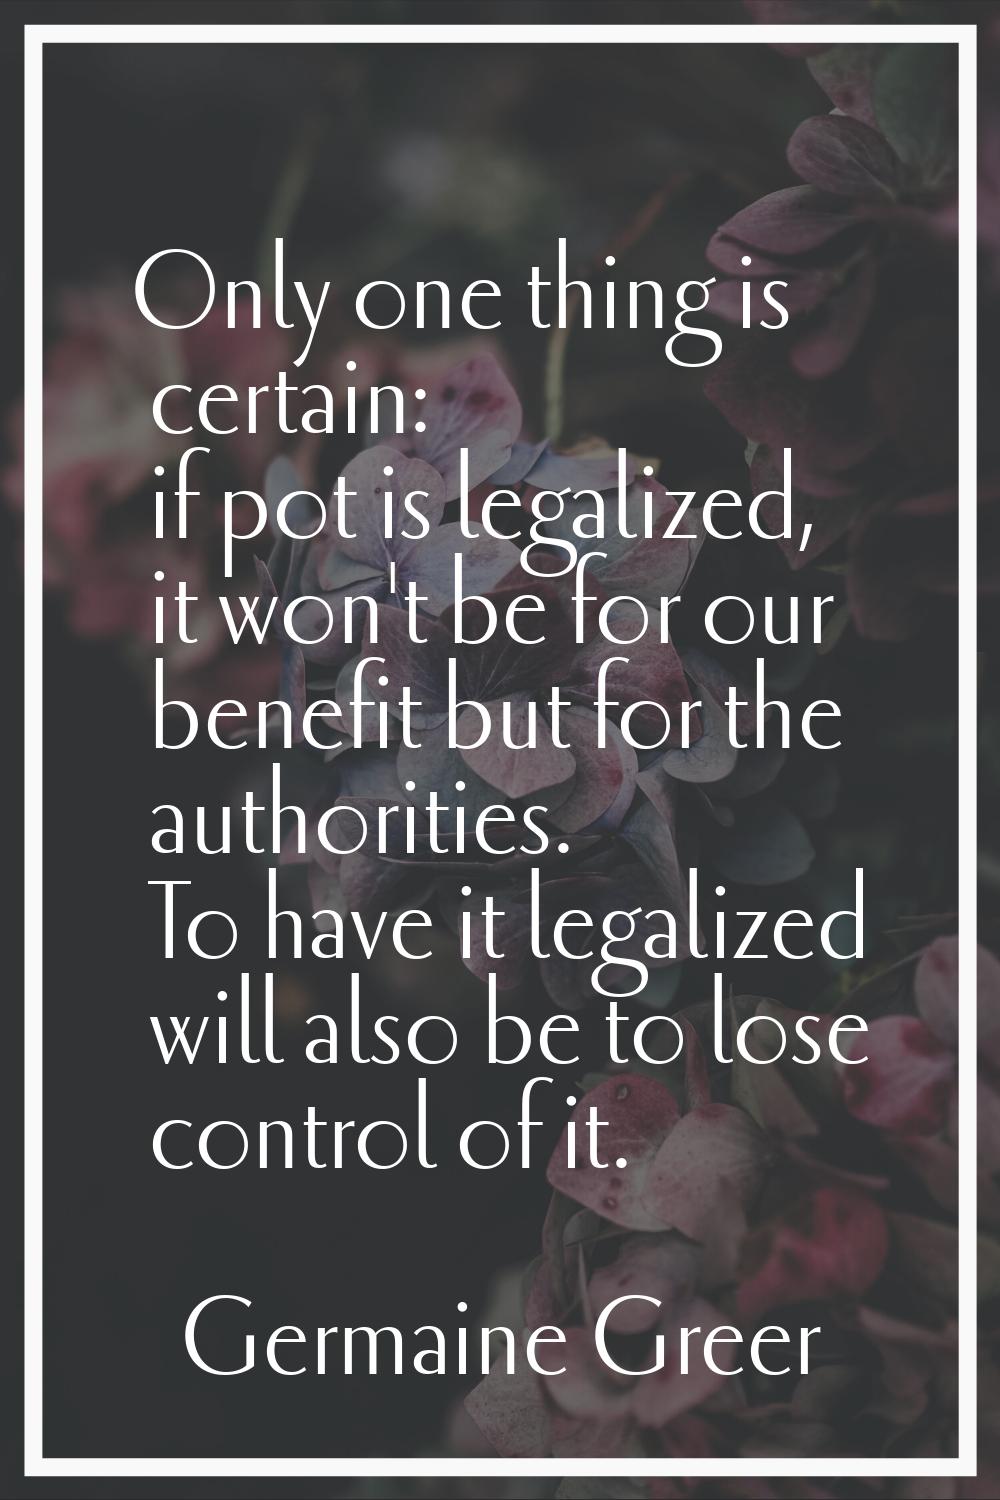 Only one thing is certain: if pot is legalized, it won't be for our benefit but for the authorities